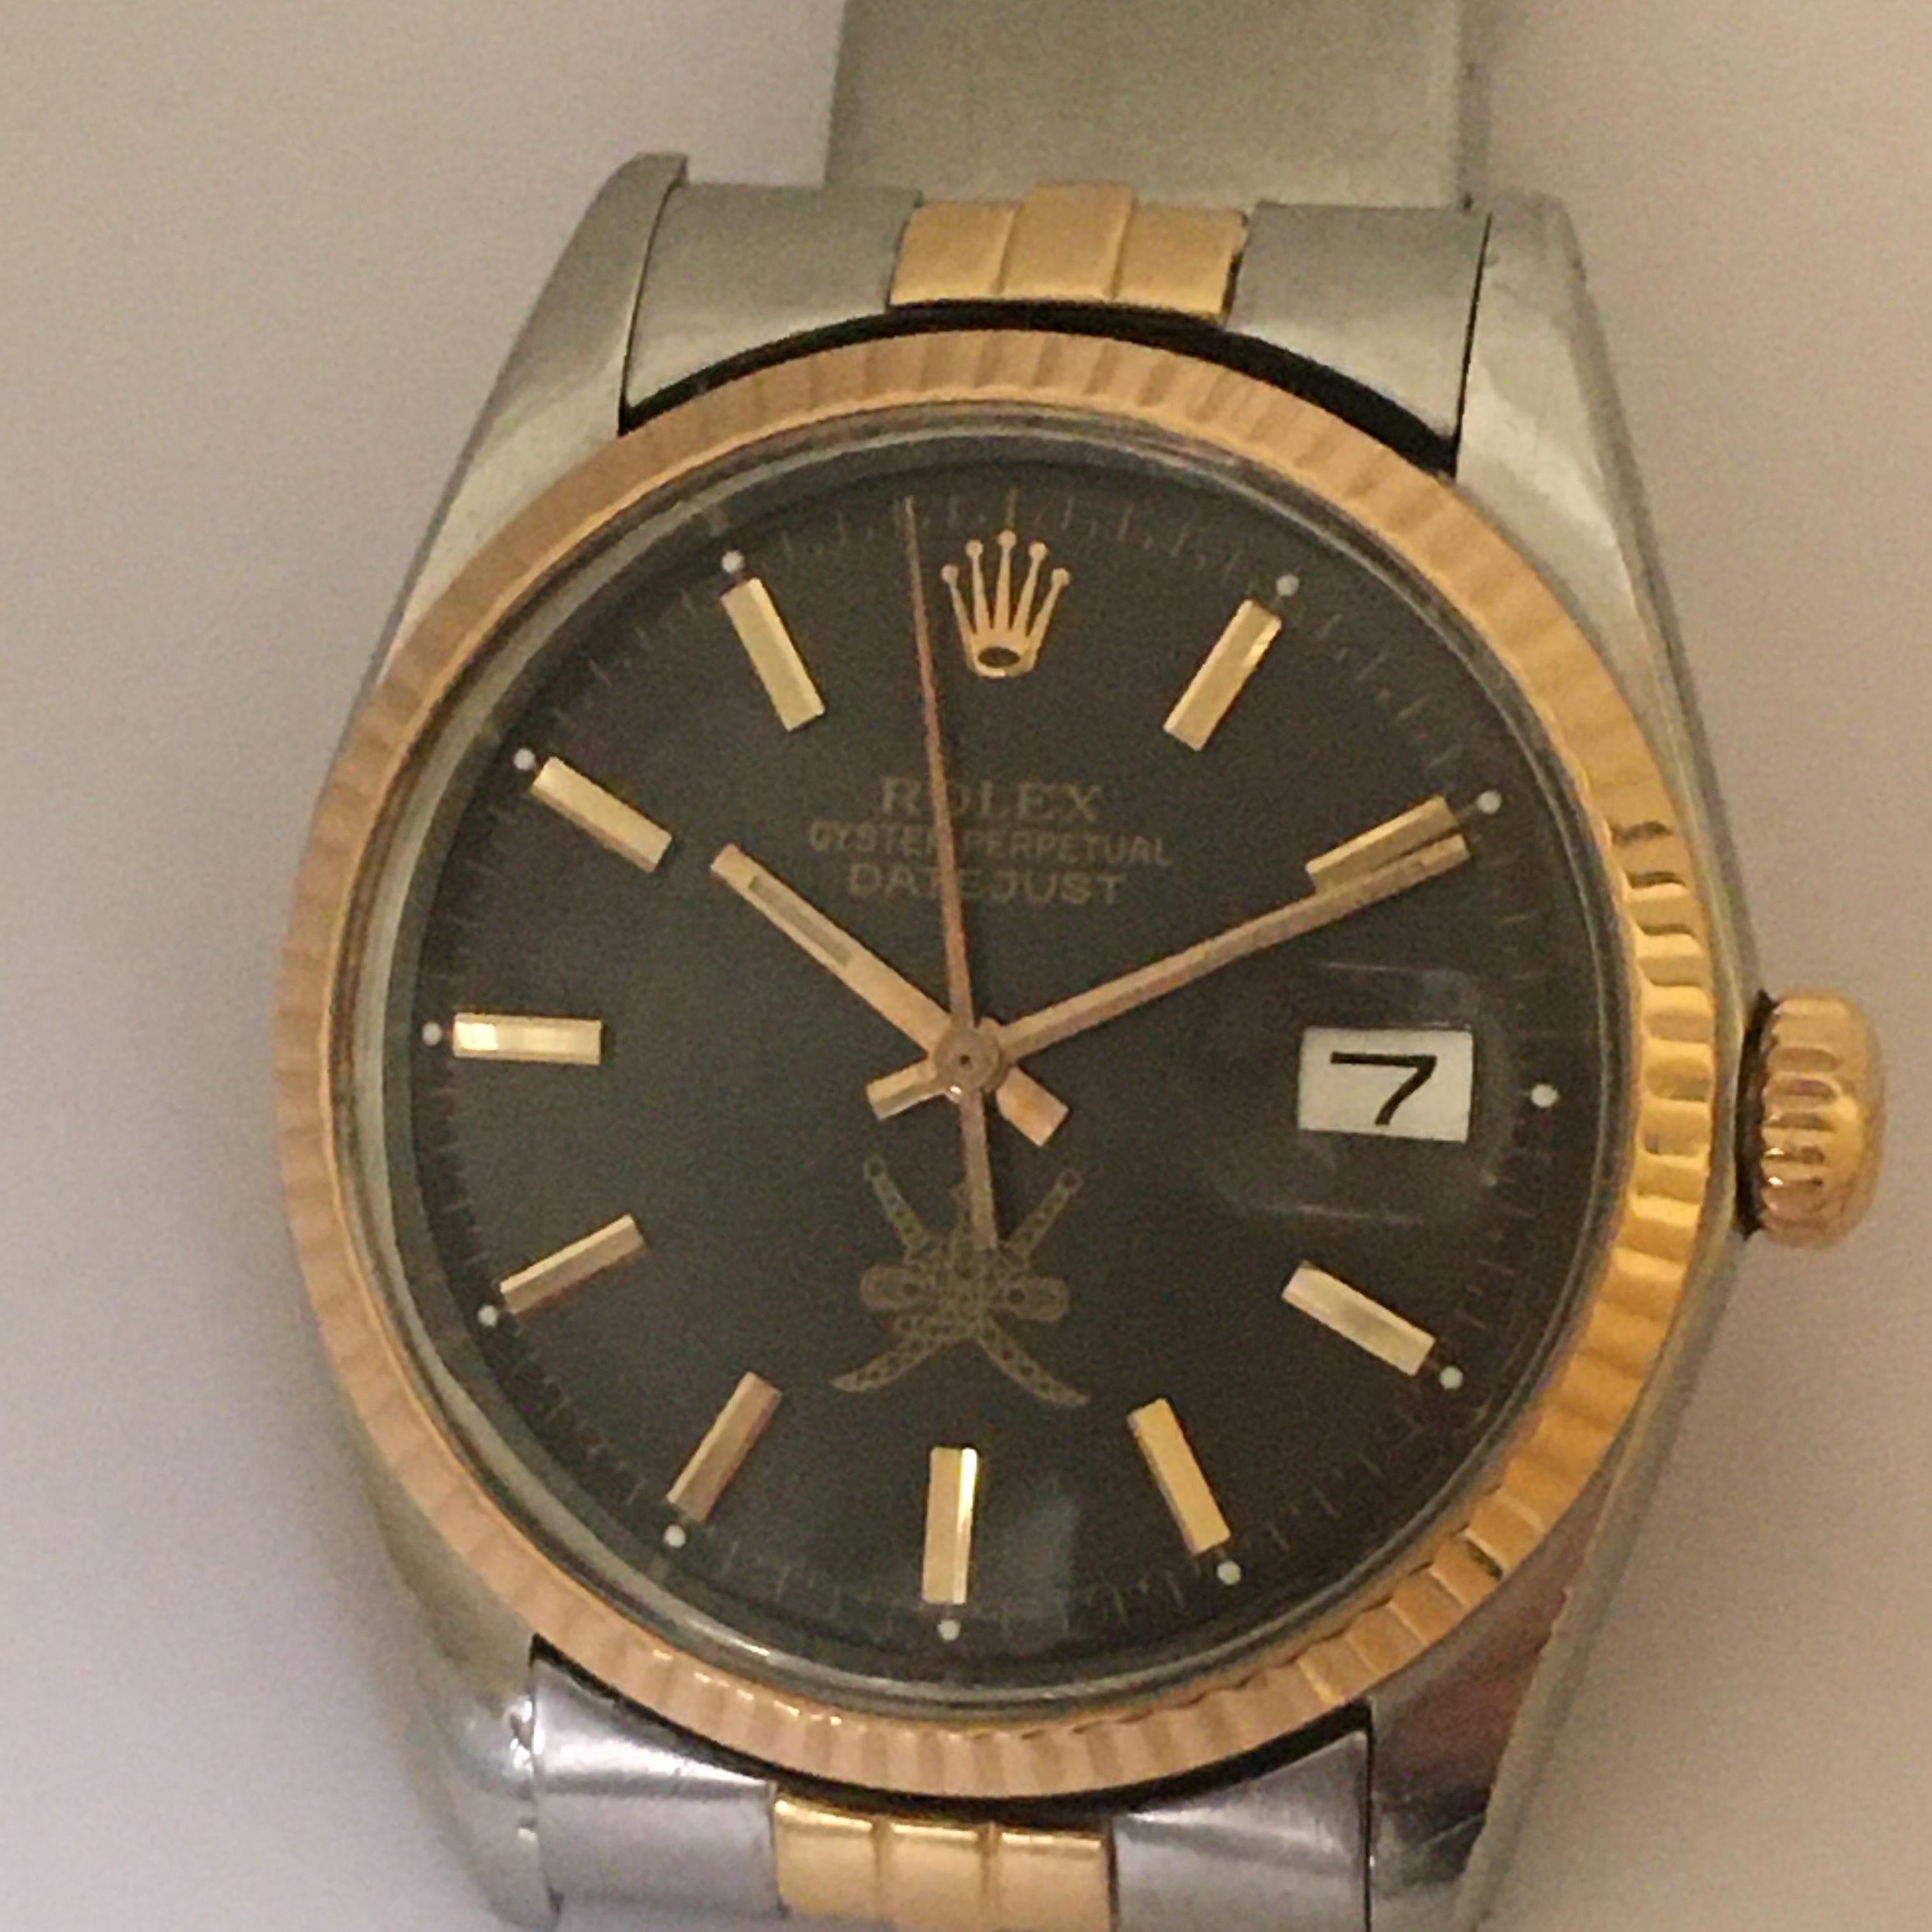 1974 Gent's Rolex Date Just Khanjar Black خنجر Dial 18K Two Tone Watch Ref 1603 For Sale 1